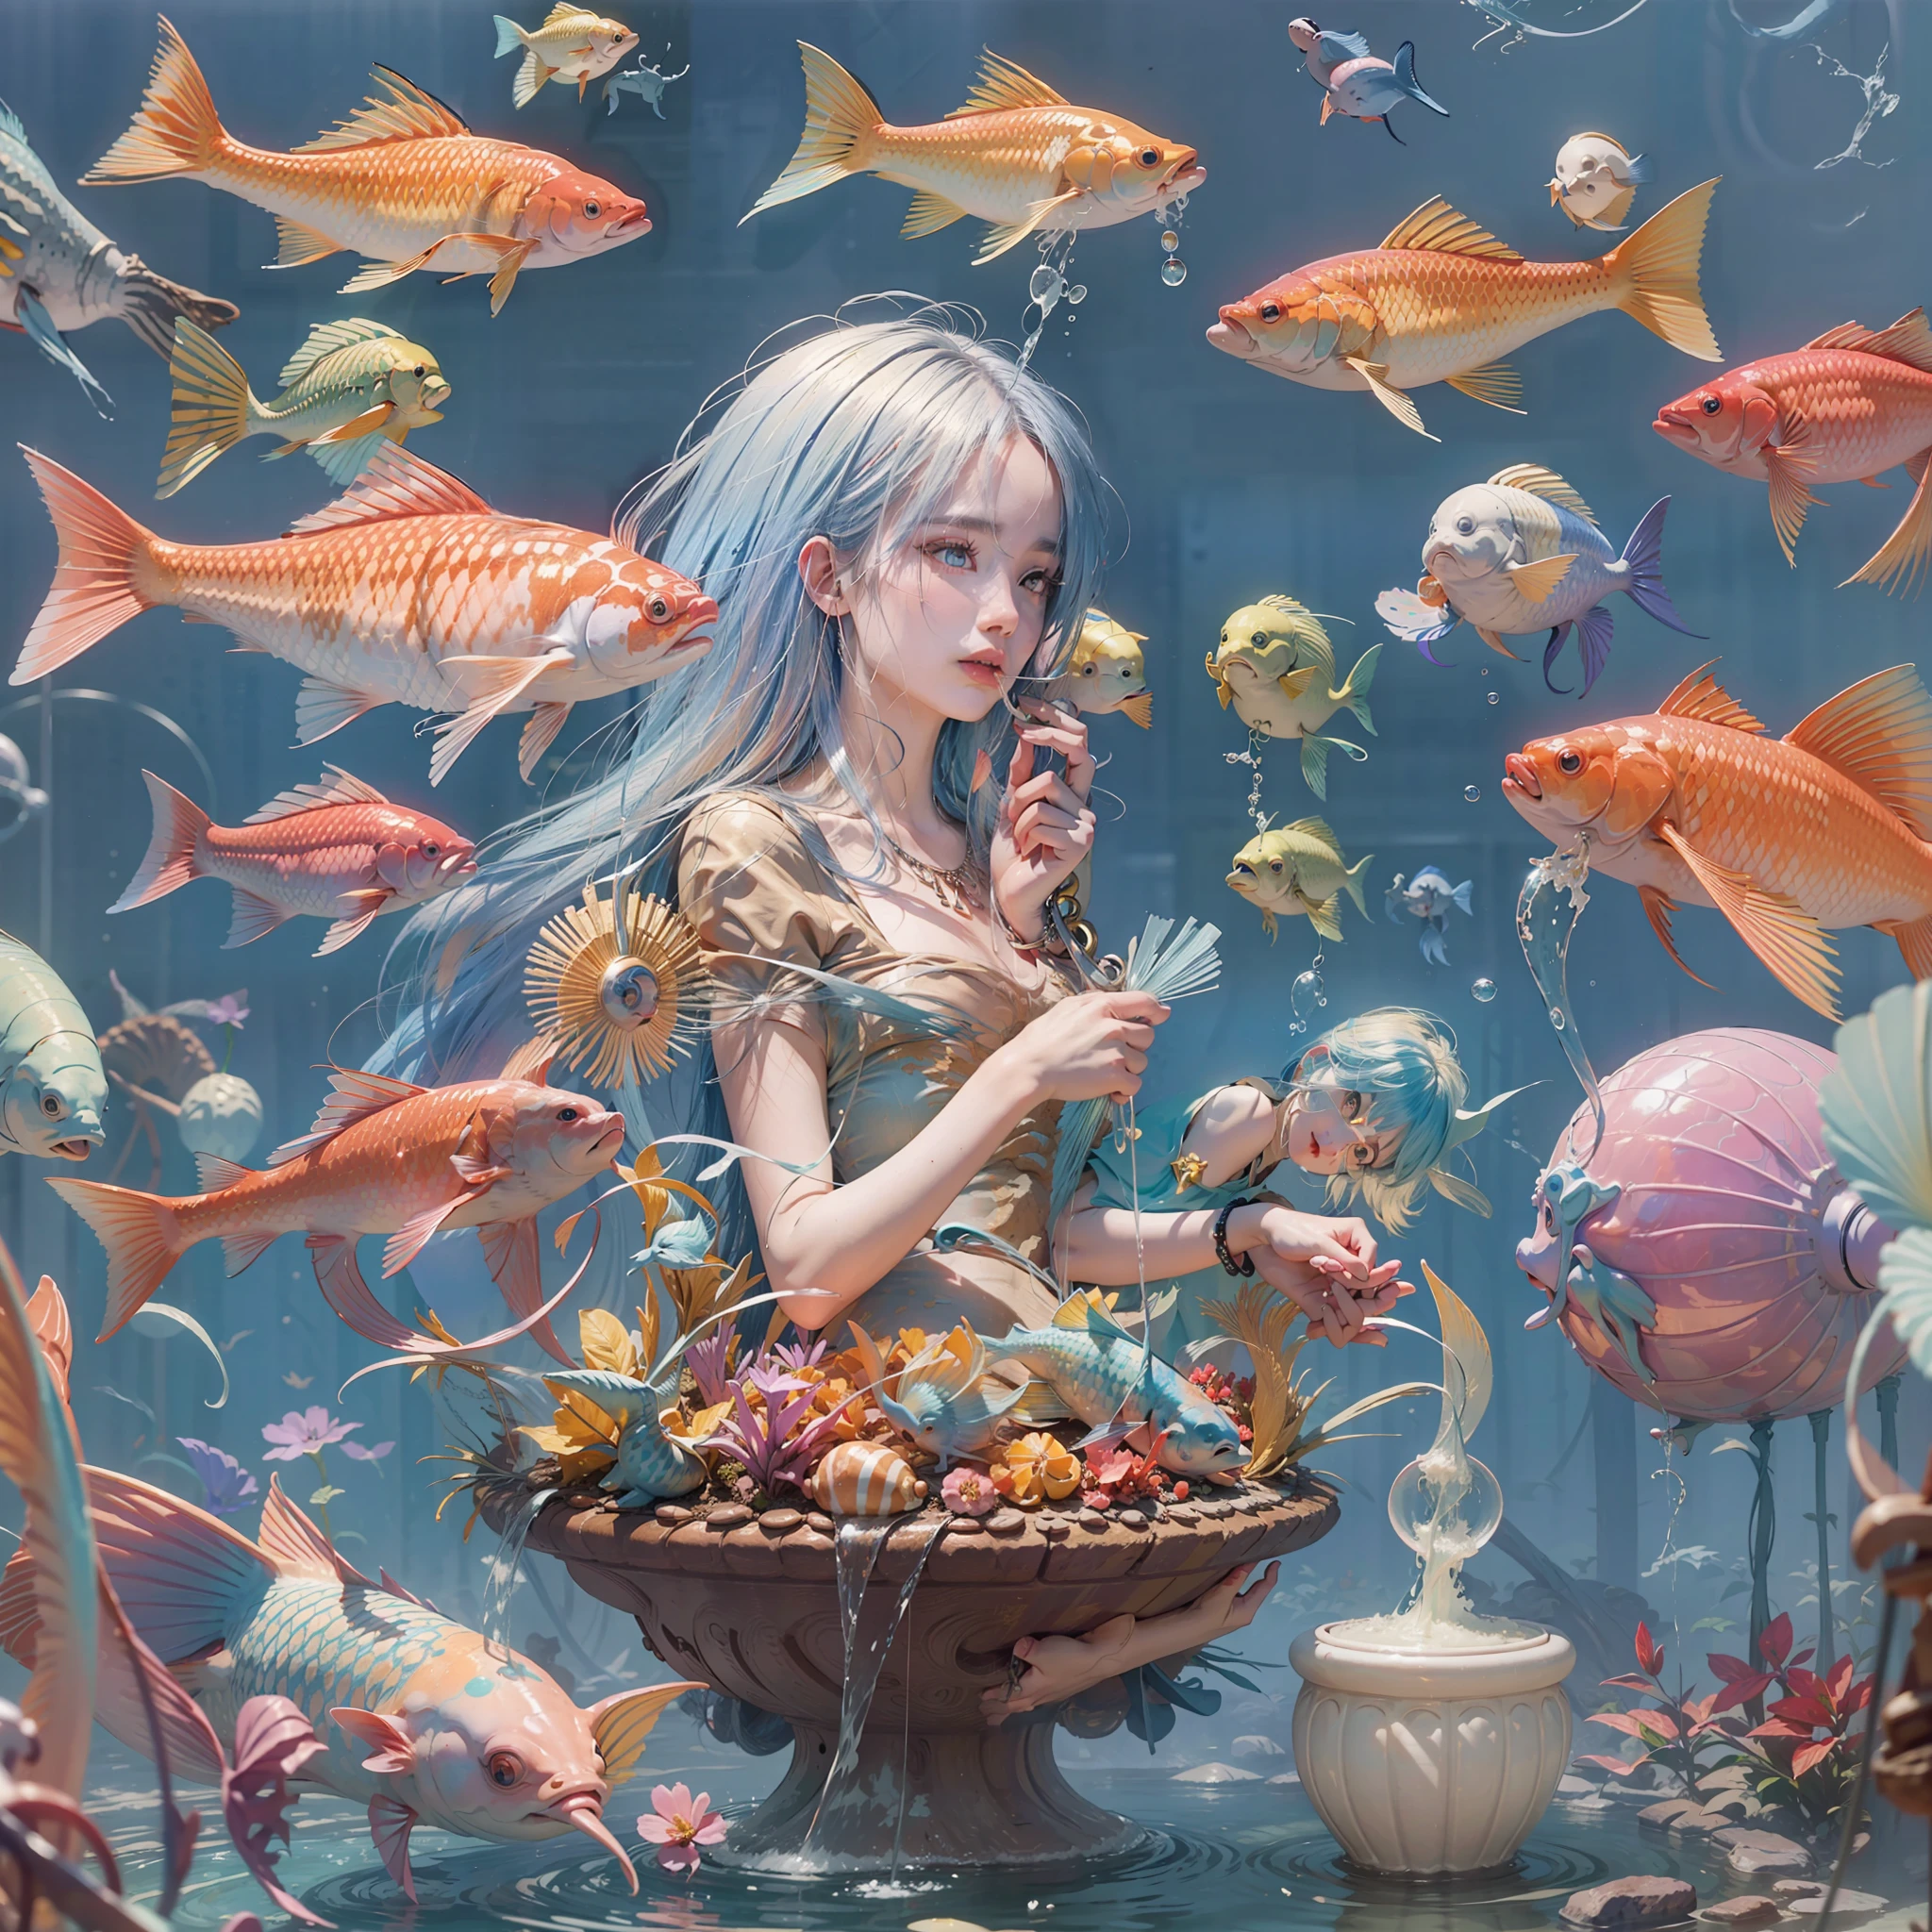 Anime girl with fish and flowers in a bowl - SeaArt AI